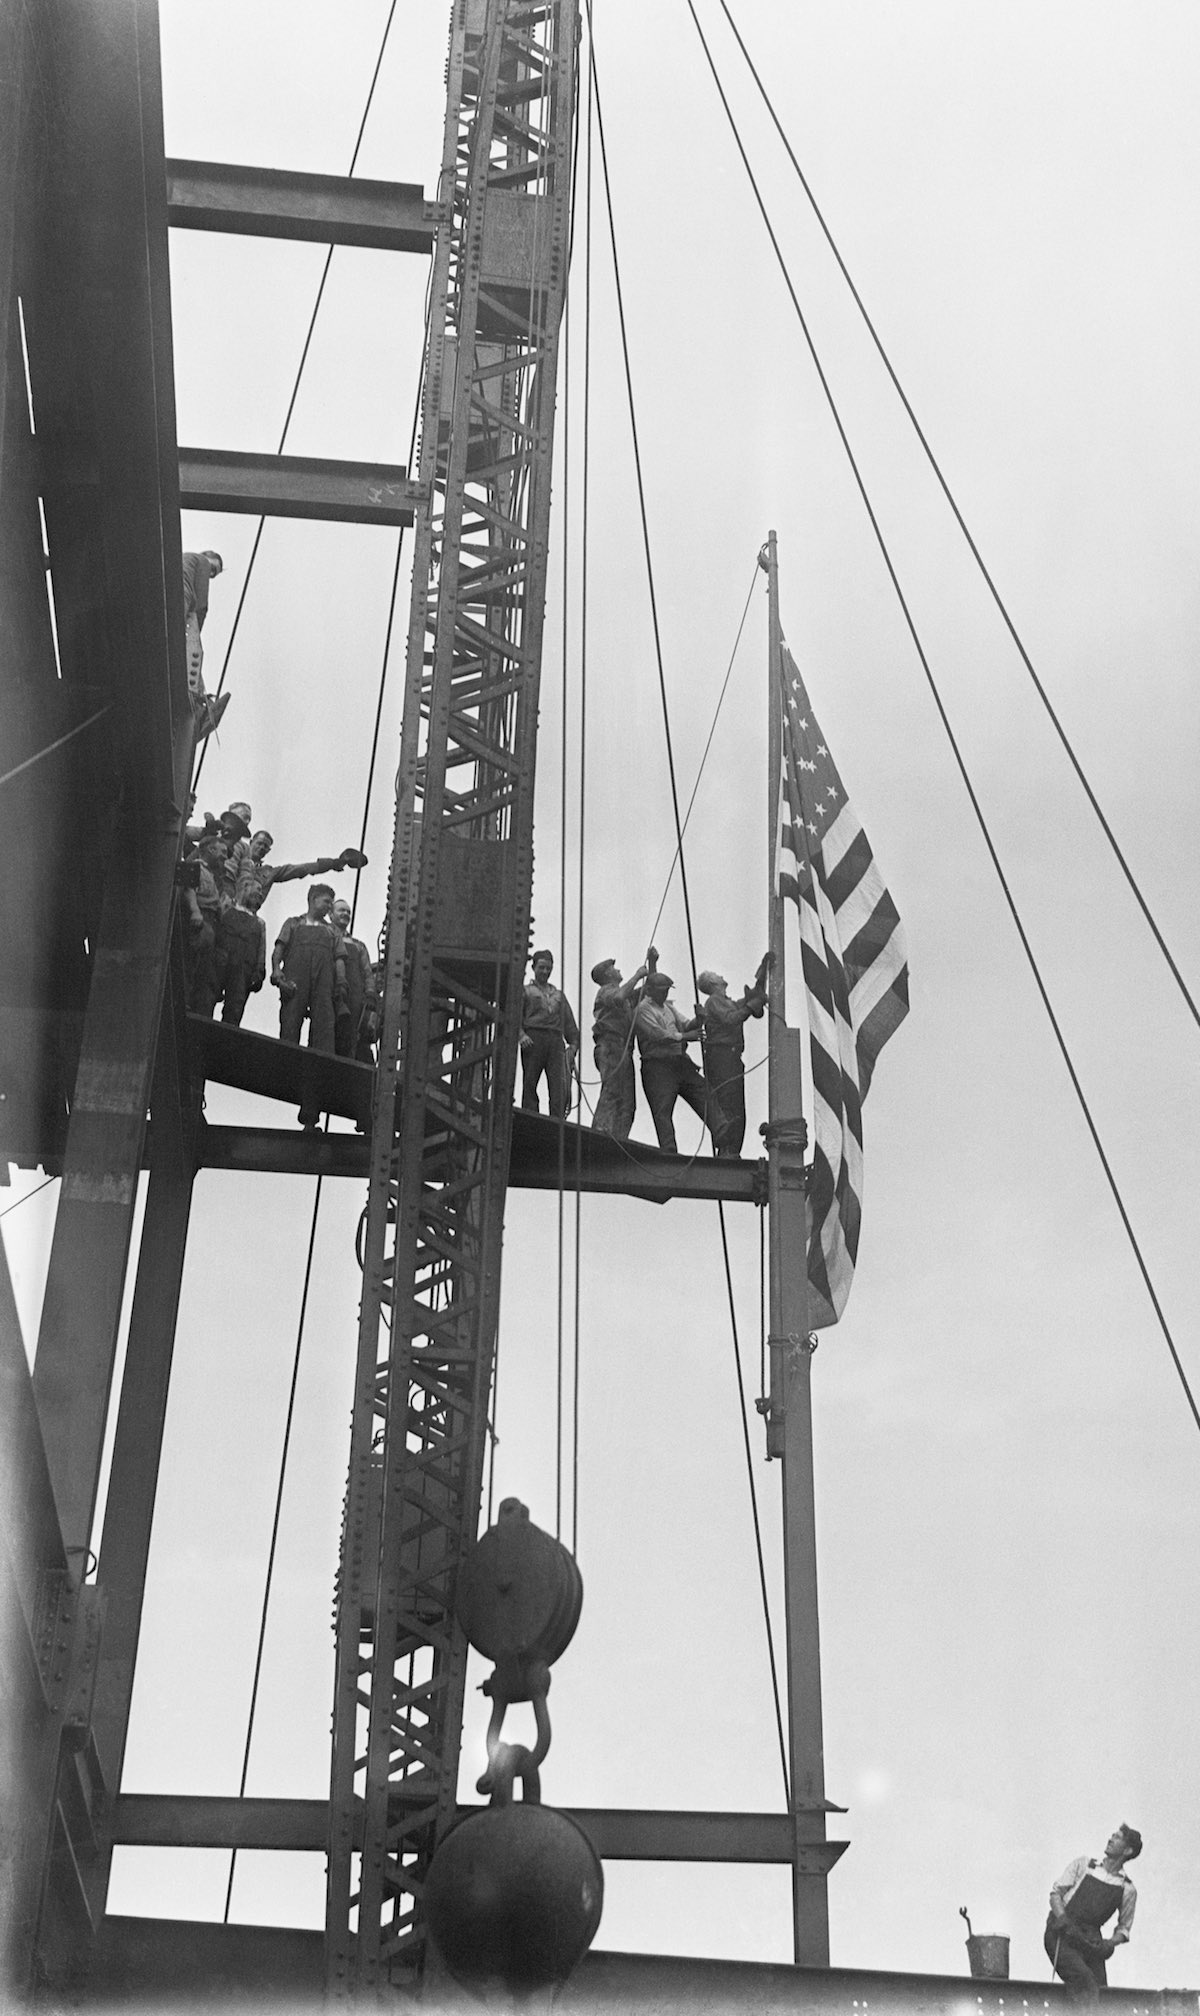 Workmen Raise Flag At The Empire State